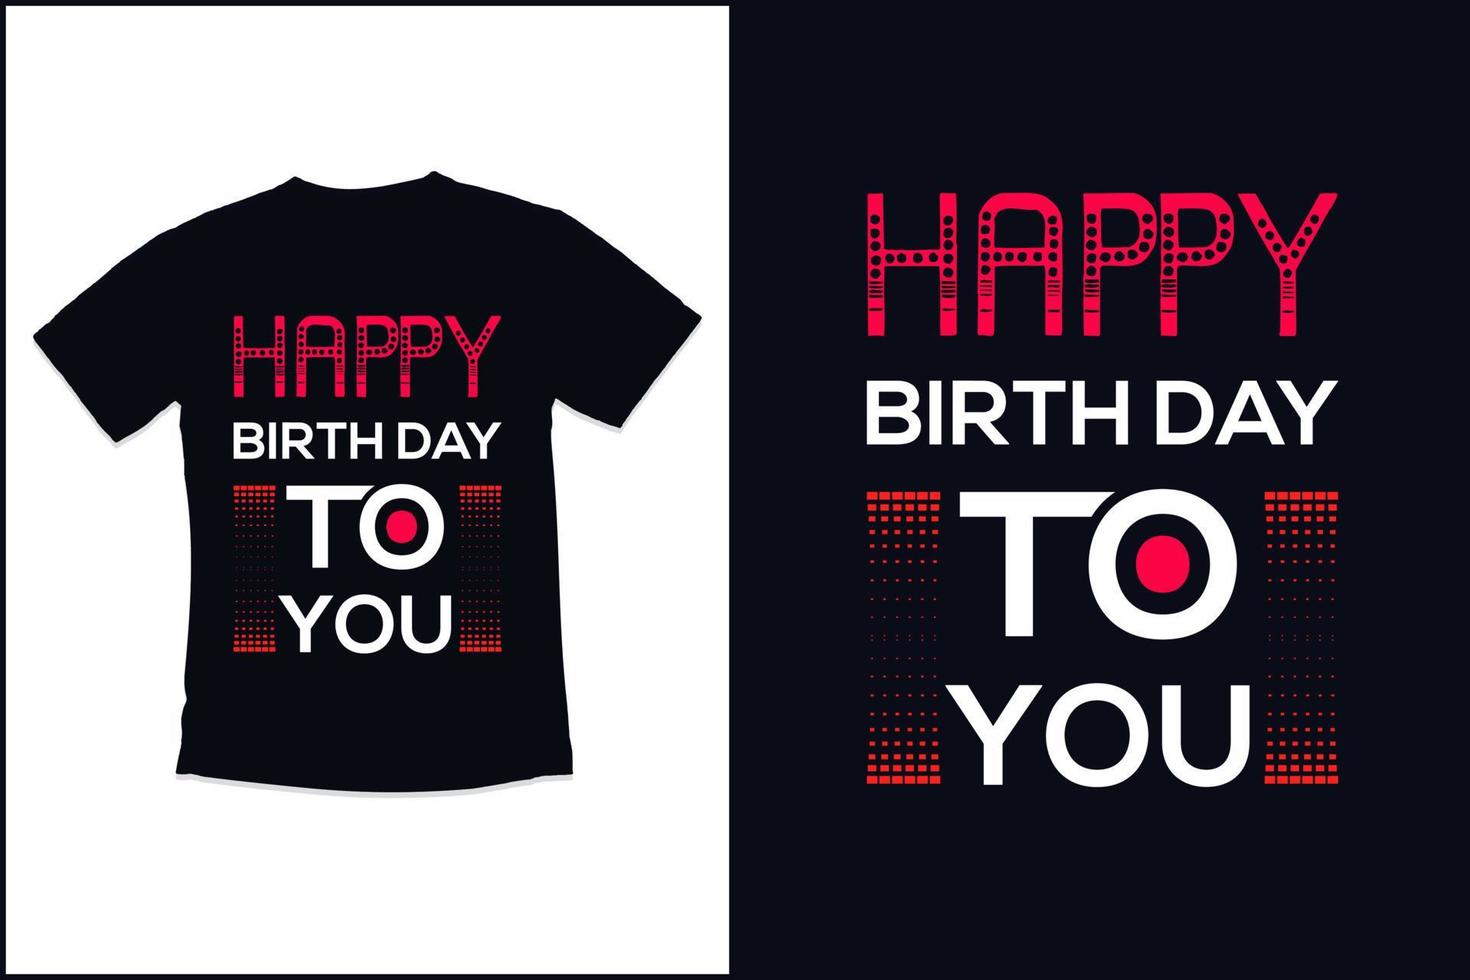 Birthday t shirt design template with modern quotes typography t shirt design vector